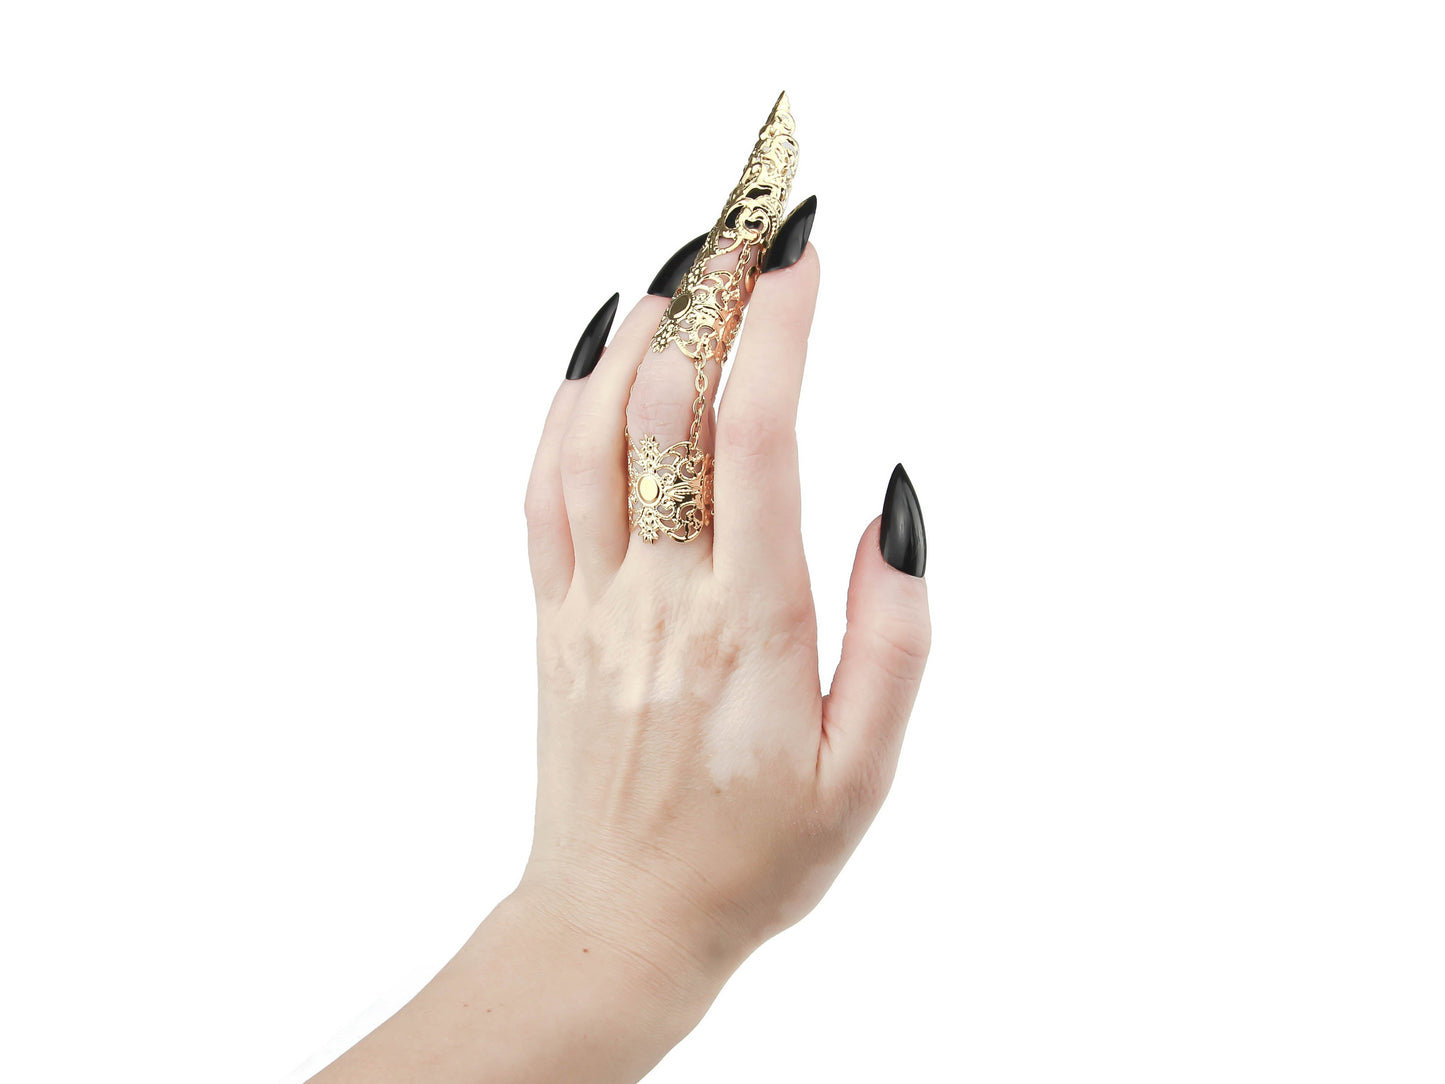 A hand models a Myril Jewels full finger gold double ring, featuring an ornate, long claw design that extends over the nail, exemplifying a bold neo-goth aesthetic. The claw ring's intricate details and golden sheen make it a perfect statement piece for gothic and alternative style enthusiasts. It’s a unique addition to any Halloween, punk, or gothic-chic jewelry collection, and suitable for witchcore, everyday wear, or as a striking accessory for rave parties and festivals.